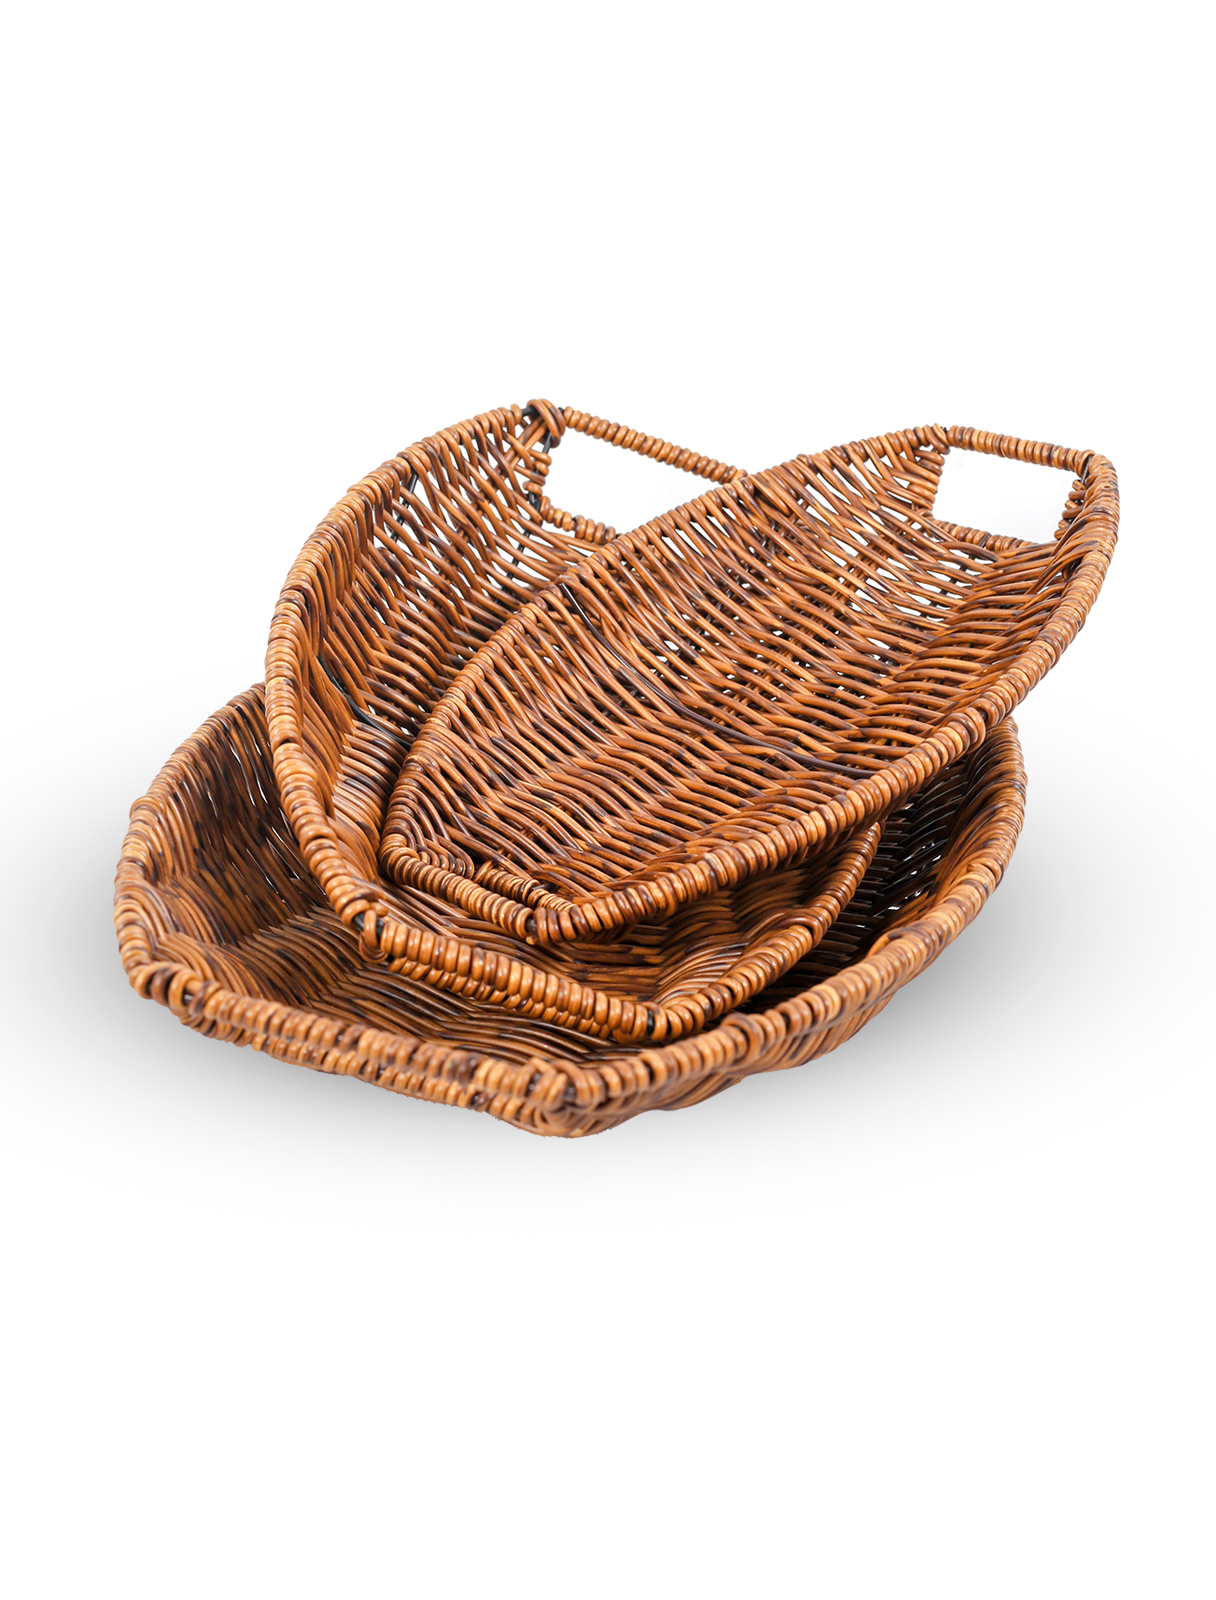 Set of 3 oval rattan trays with a modern design